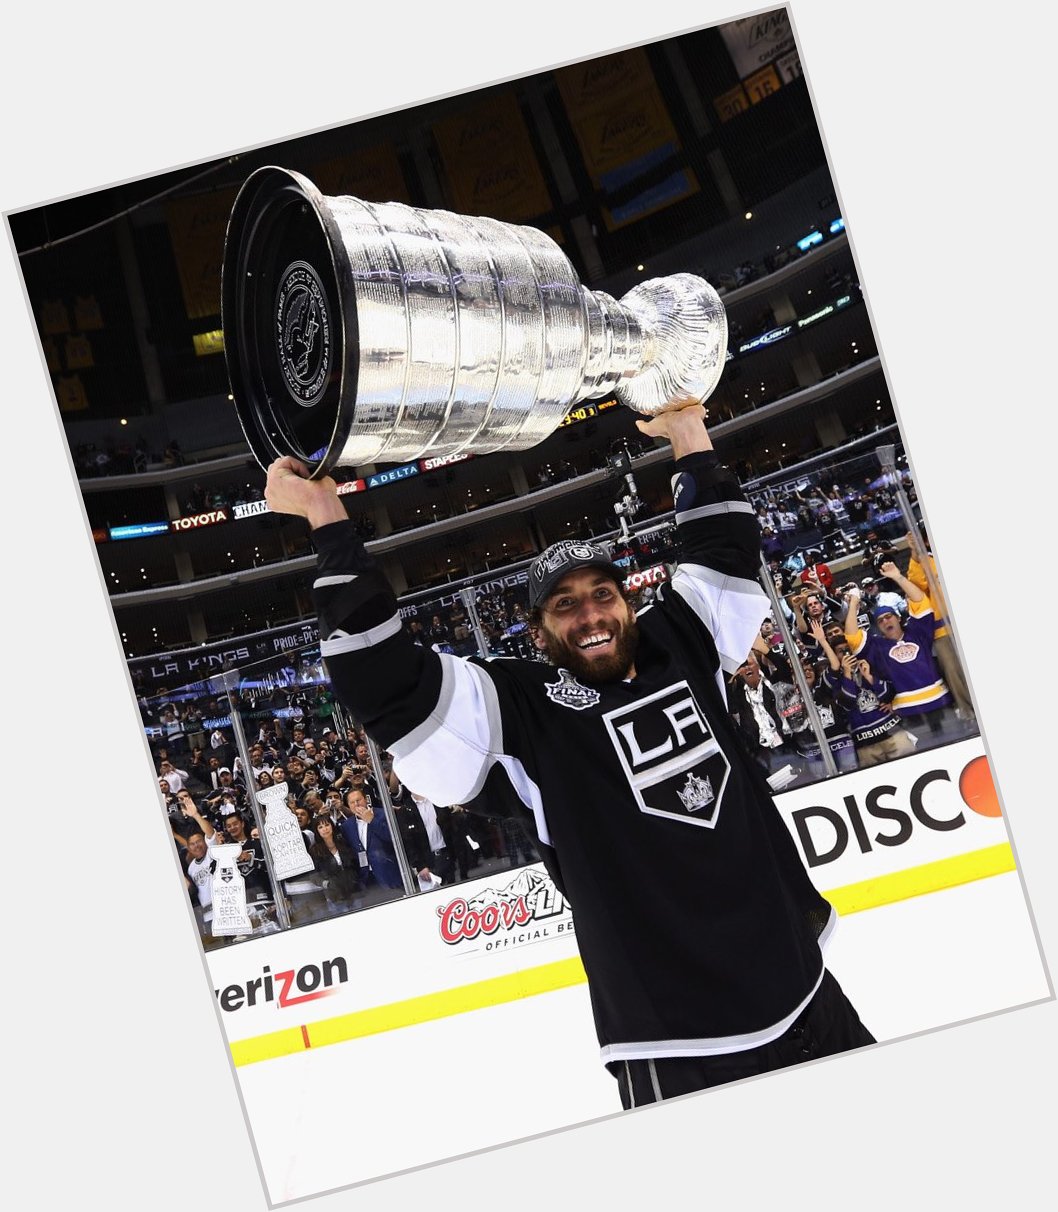 Happy birthday to former forward Jarret Stoll, who was born on June 24, 1982.  